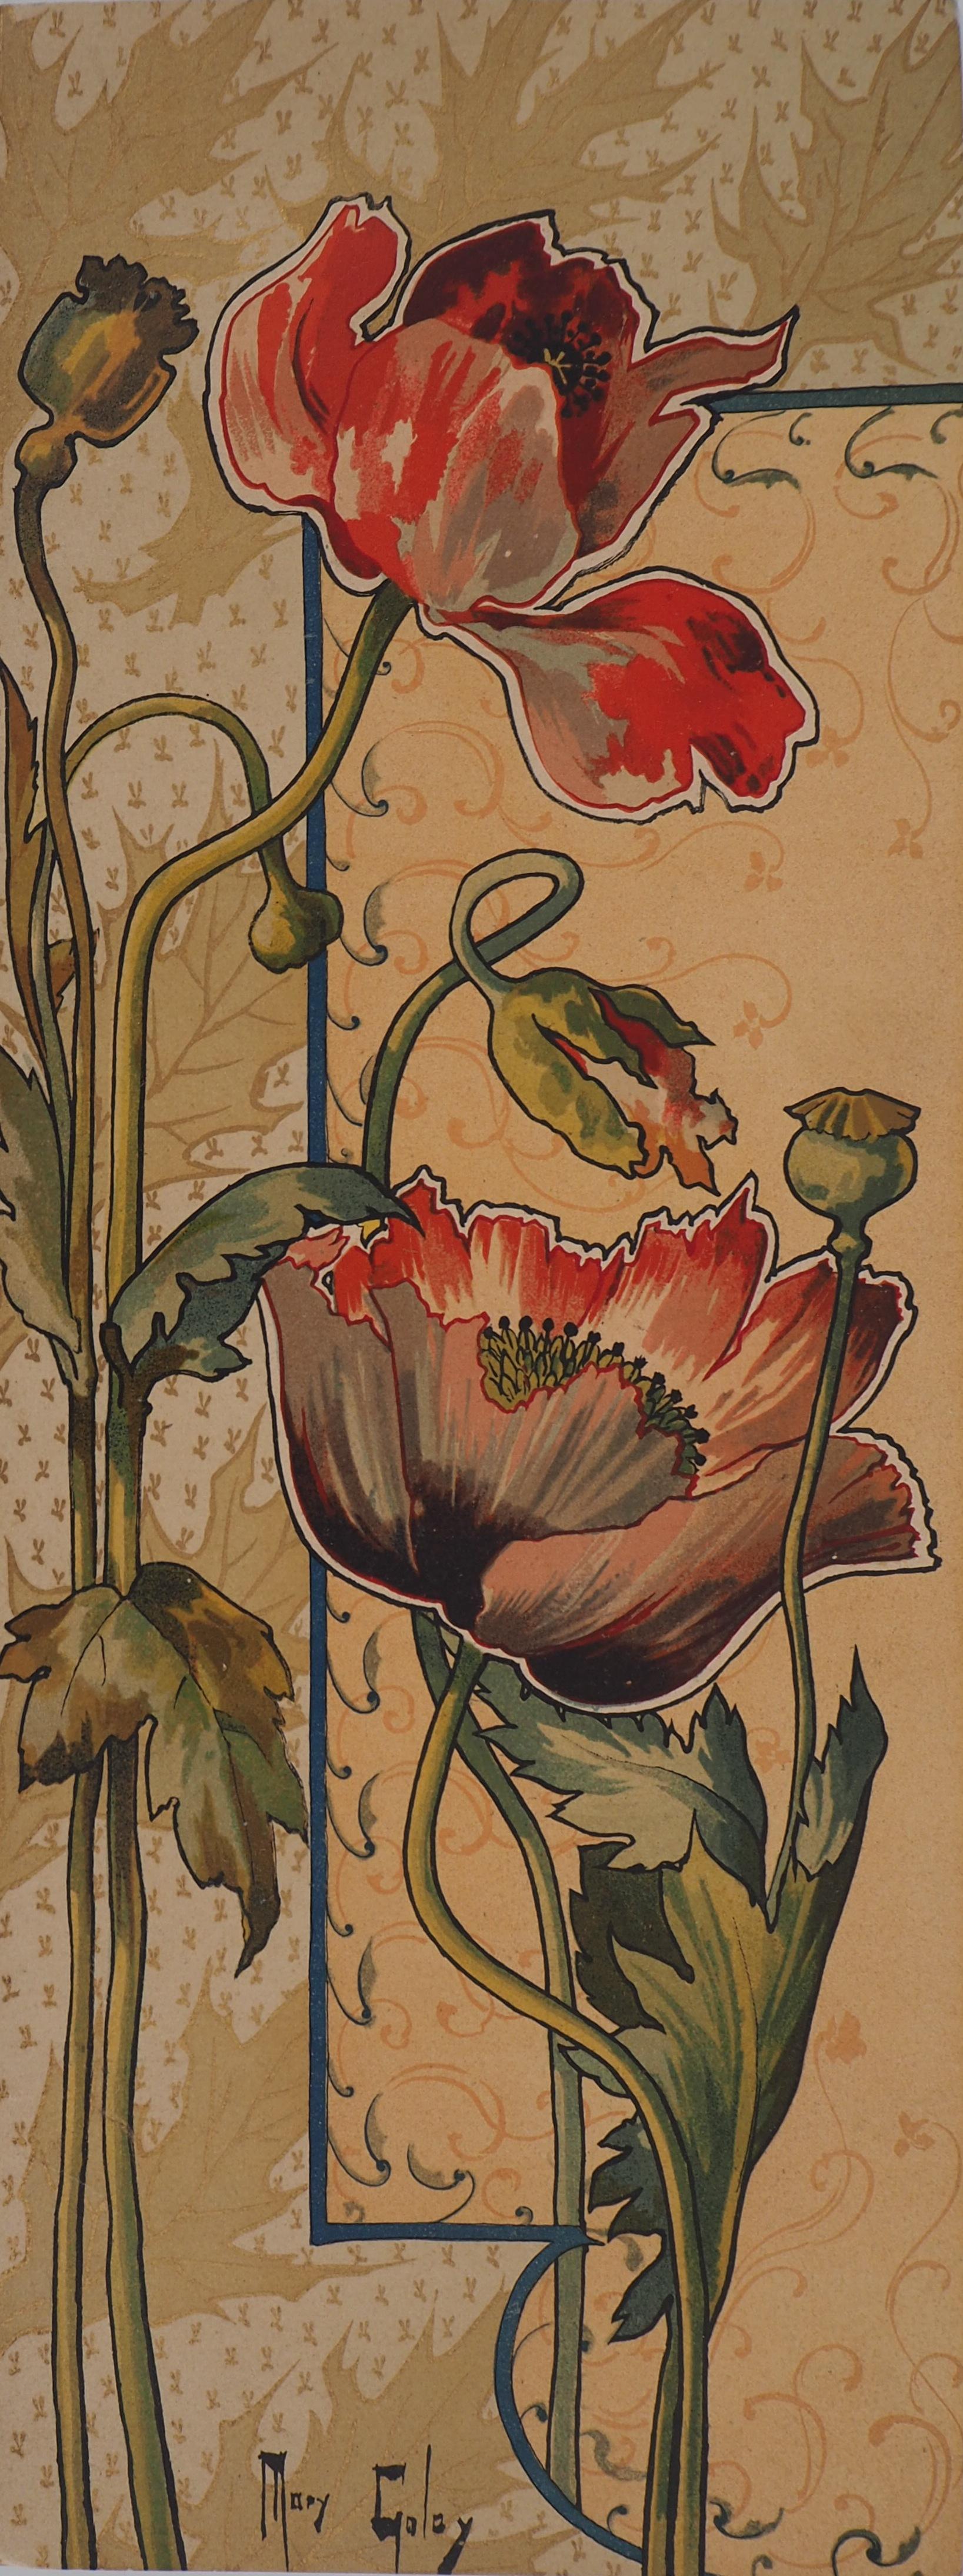 Mary Golay Landscape Print - Art nouveau Stylized Red Poppies - Original lithograph